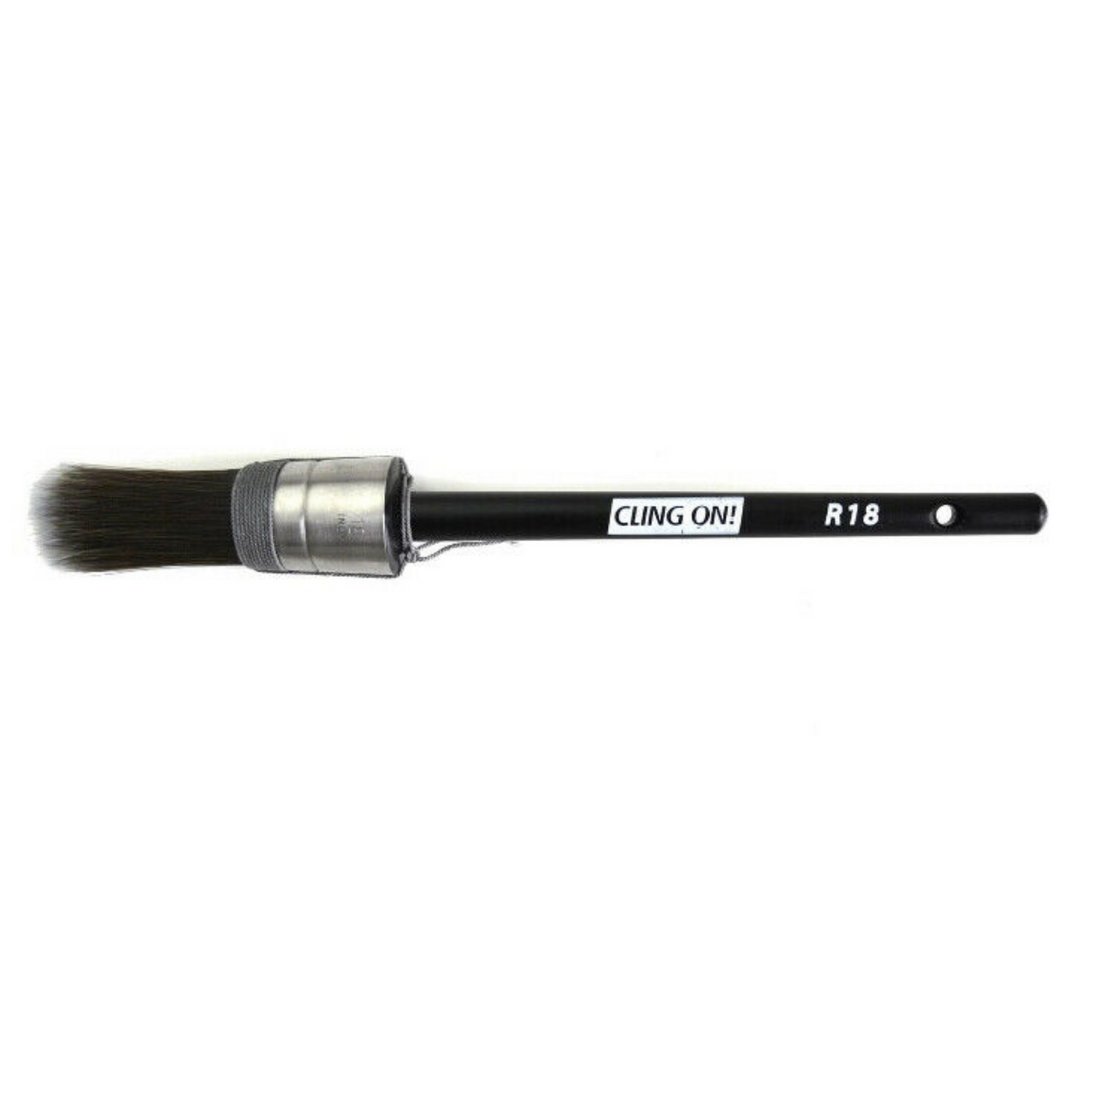 Cling On R18 Round Brush